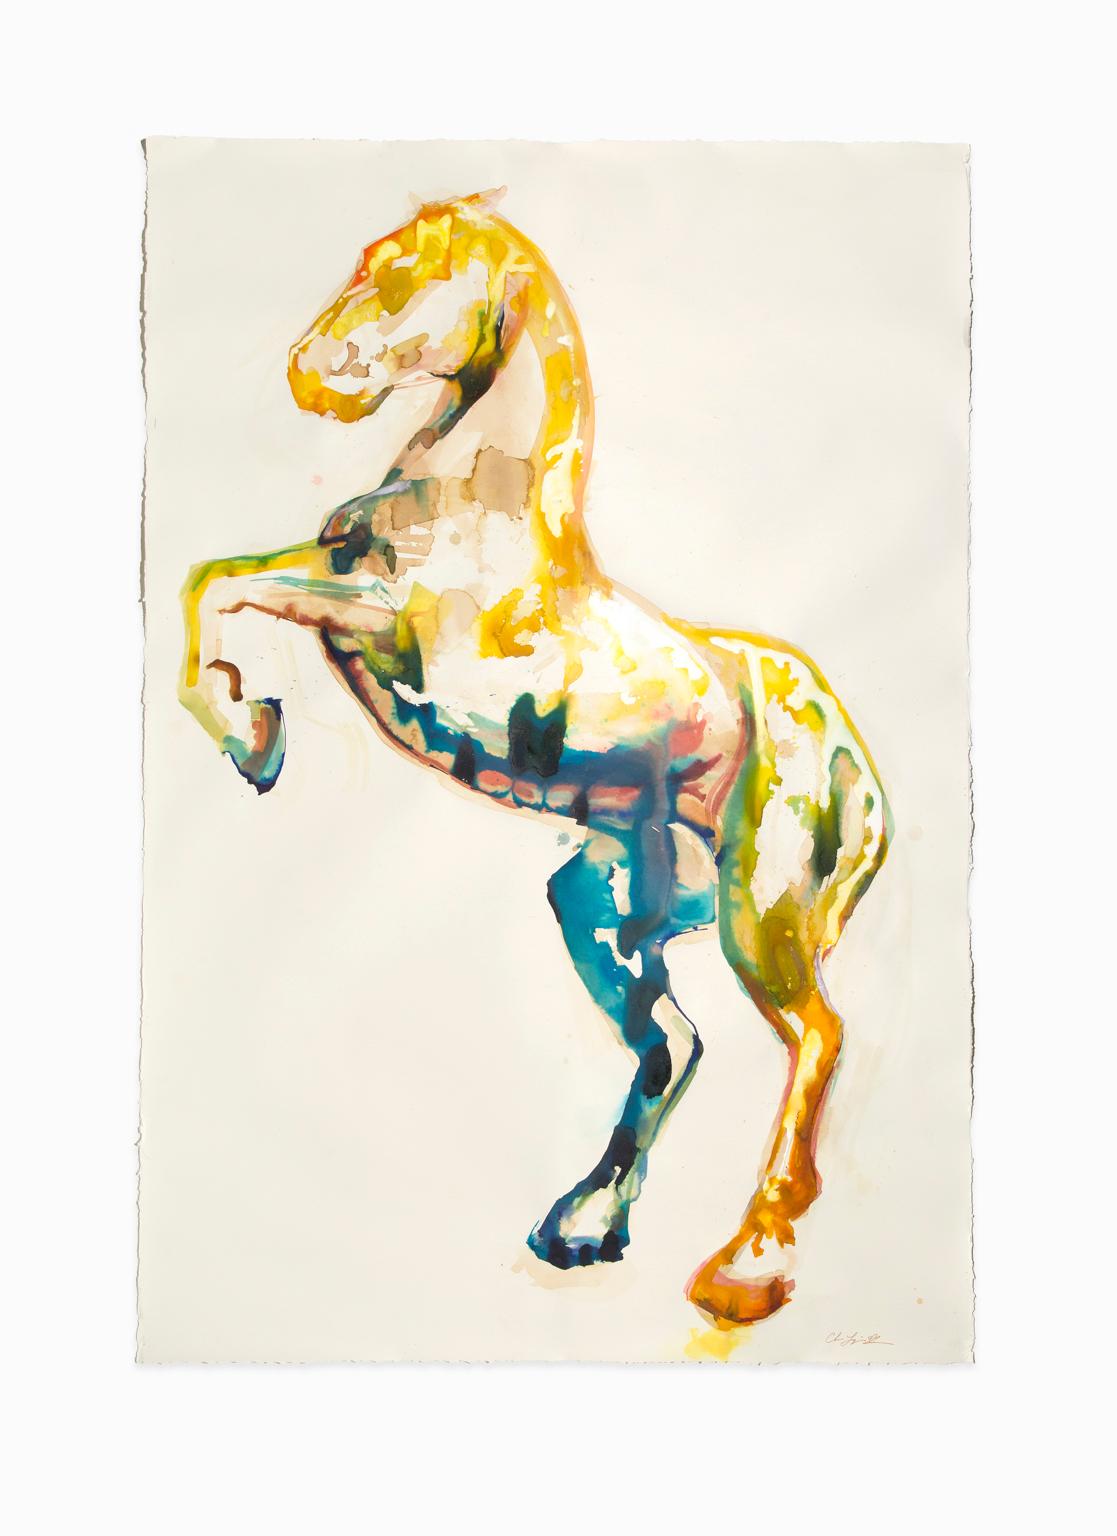 "Yellow Horse II", Large Mixed Medium, India Ink and Wine on Deckle BFK Paper